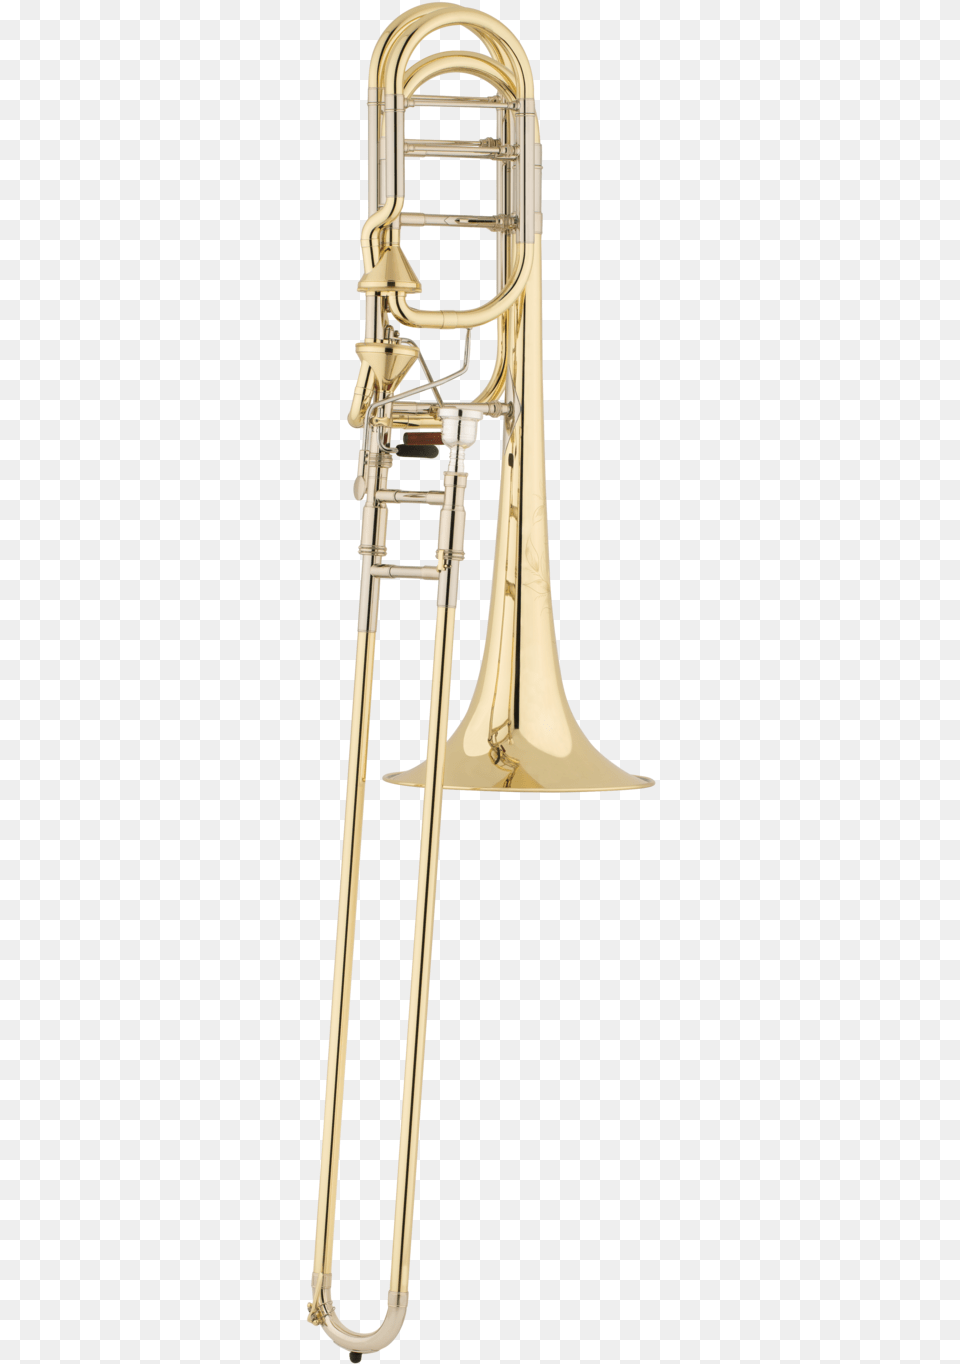 Trombone Shires Trombone, Musical Instrument, Brass Section Png